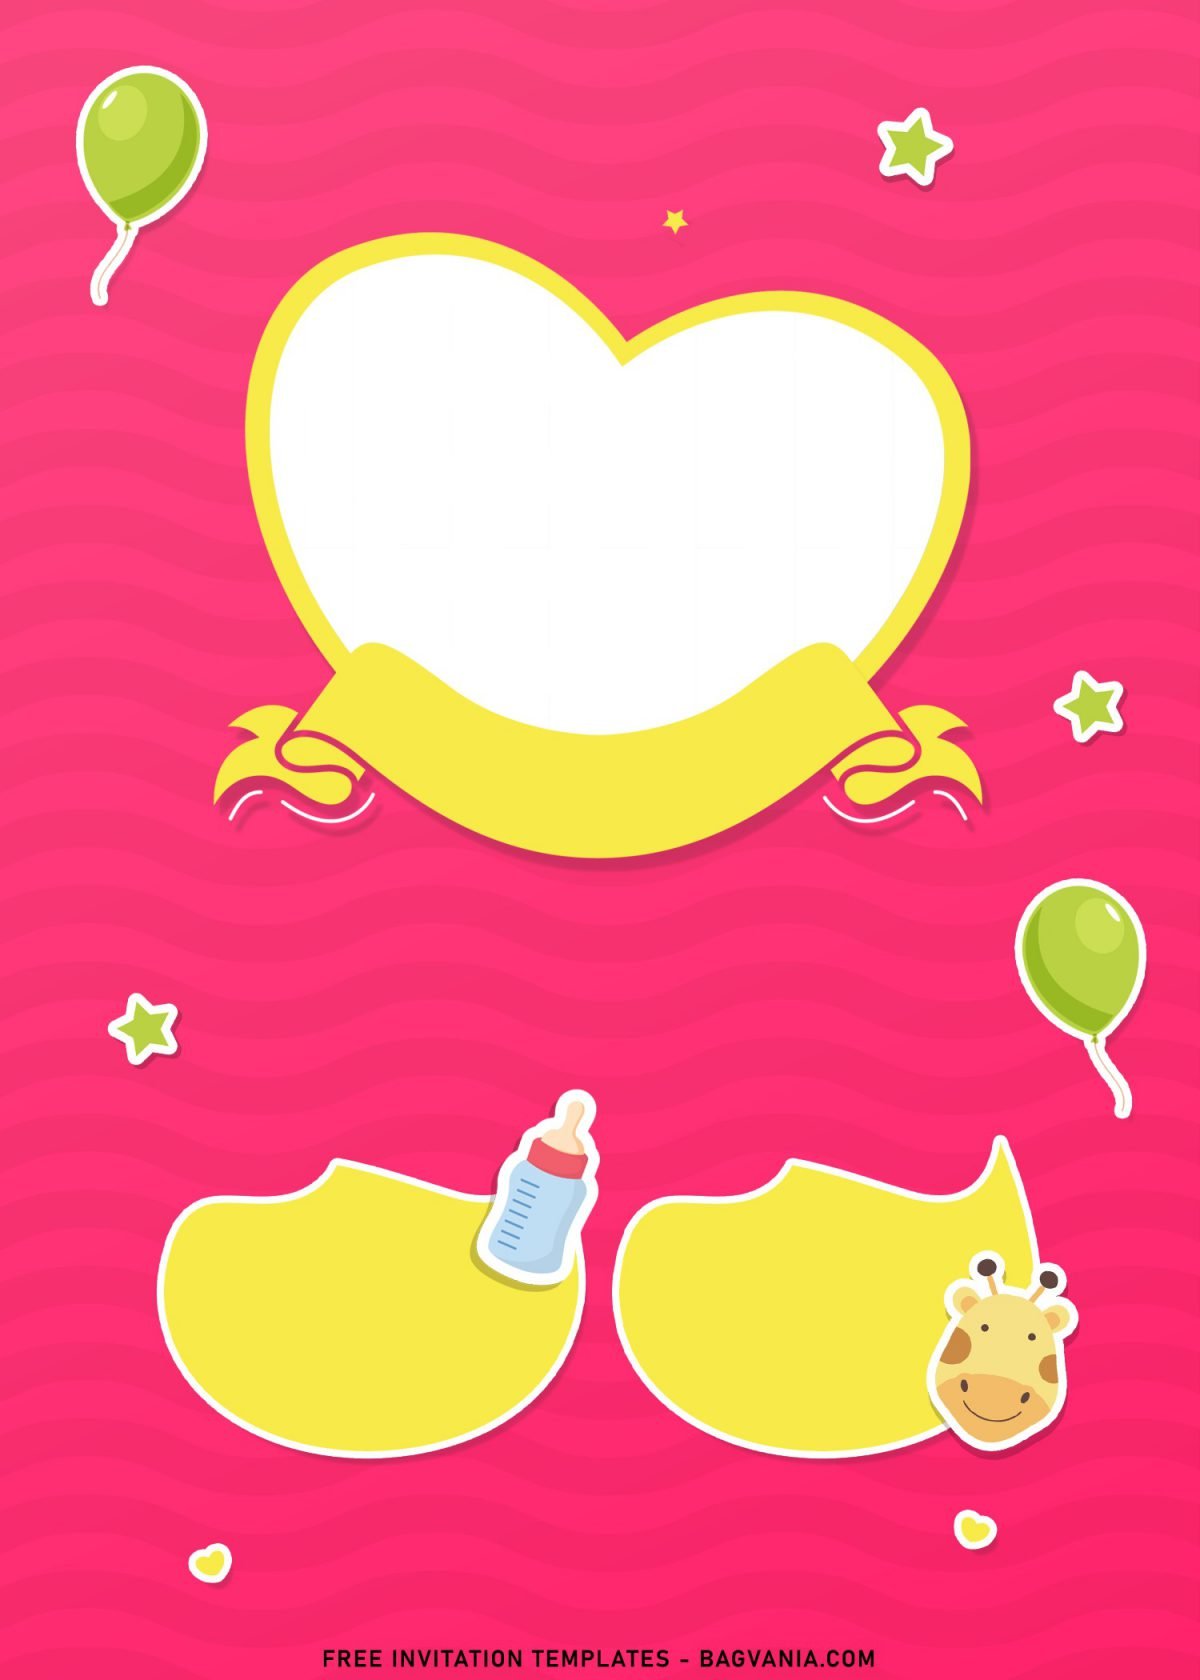 7+ Lovely Cute Birthday Invitation Templates For Your Little Girl's Birthday with cute heart shaped picture frame